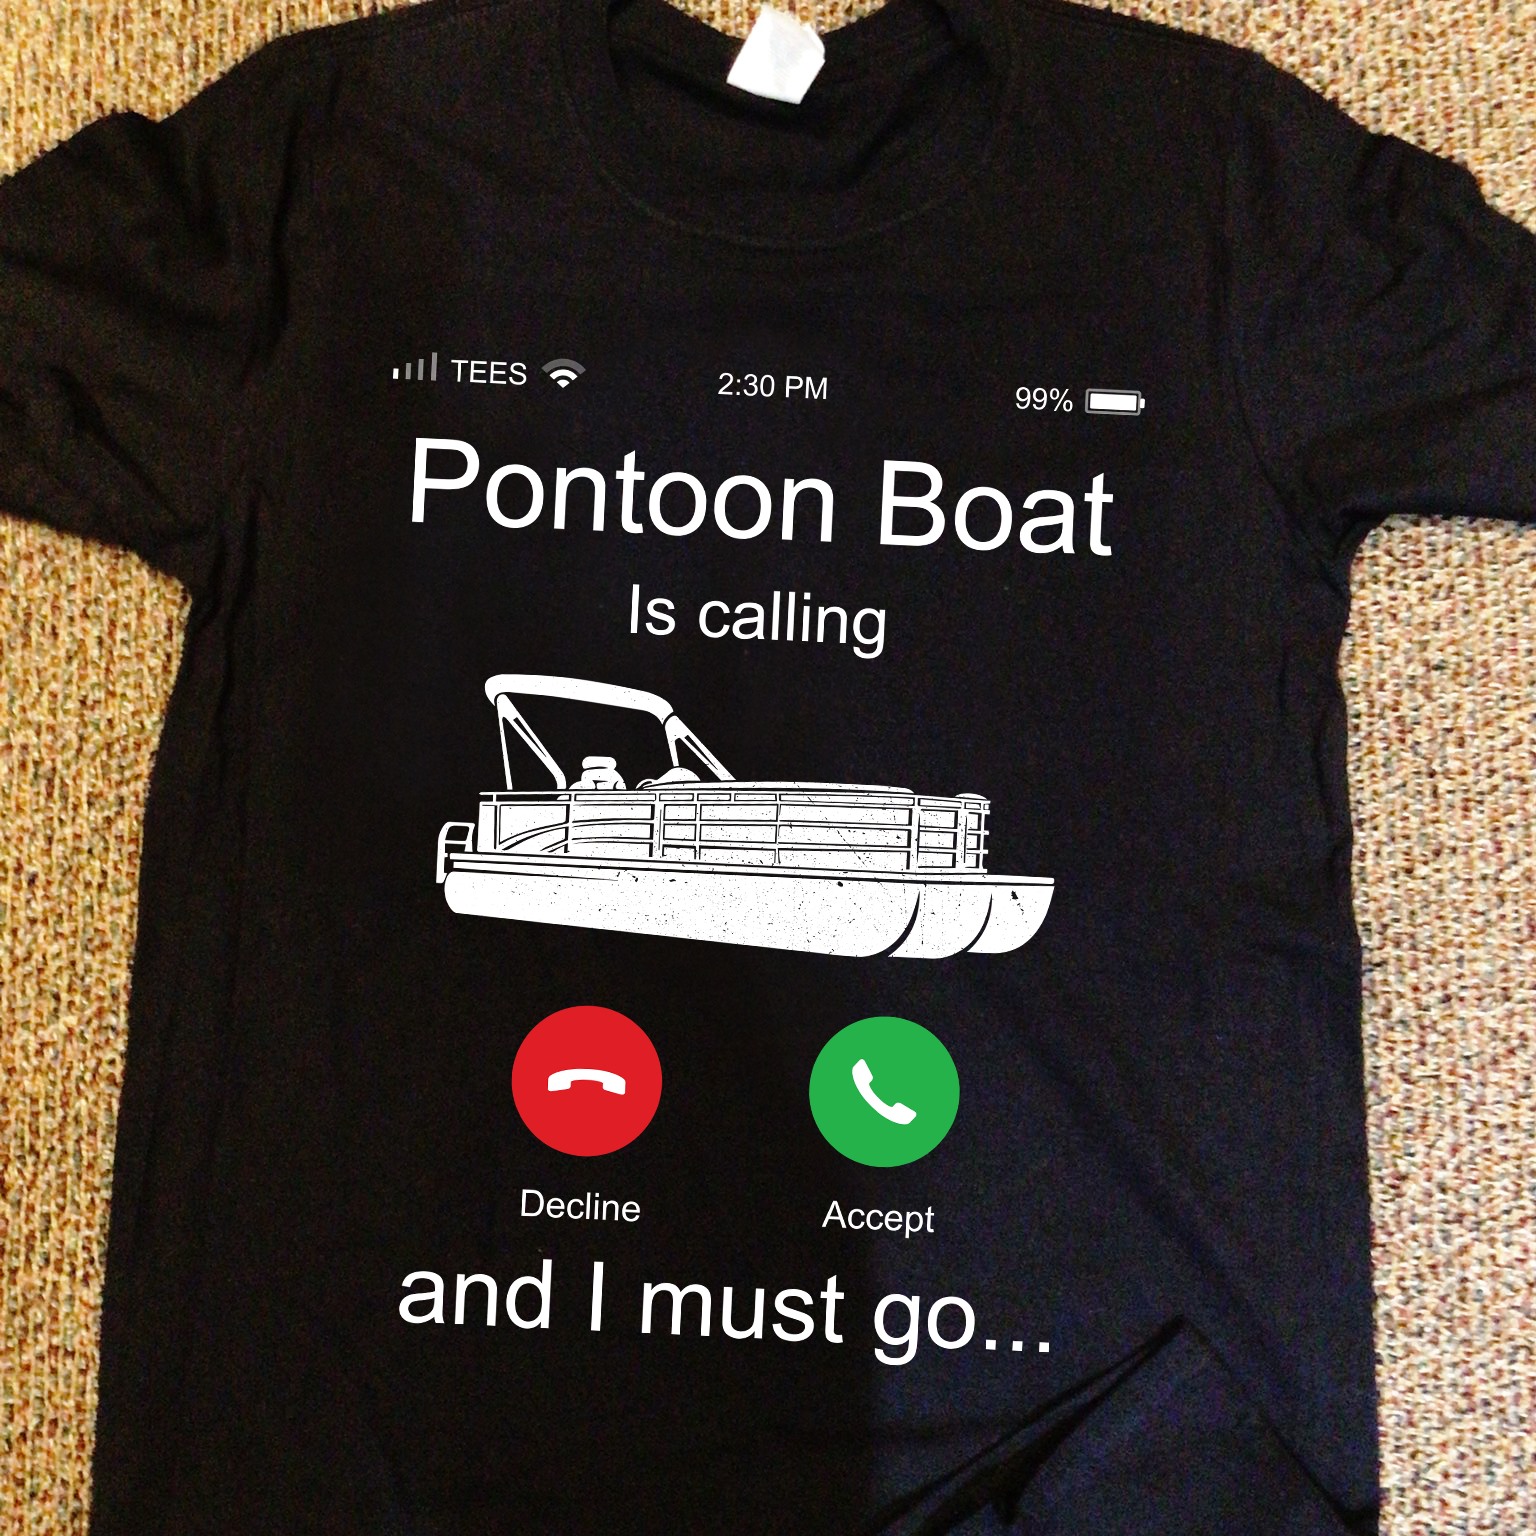 Pontoon boat is calling and I must go - Pontoon boat driver